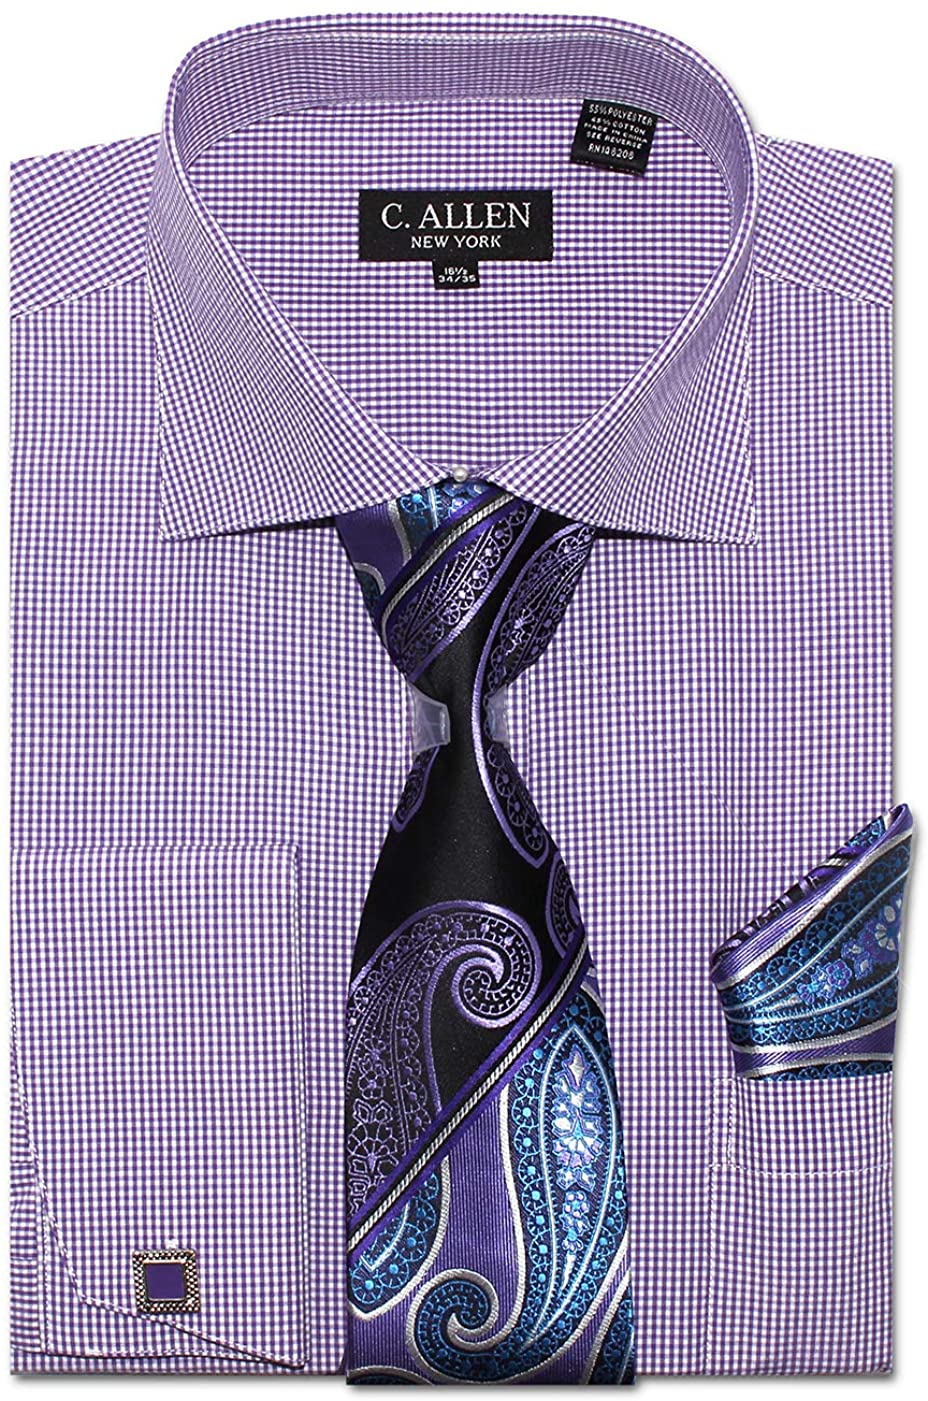 Men's Solid Square Pattern Regular Fit French Cuffs Dress Shirts with Tie Hanky Cufflinks Combo 